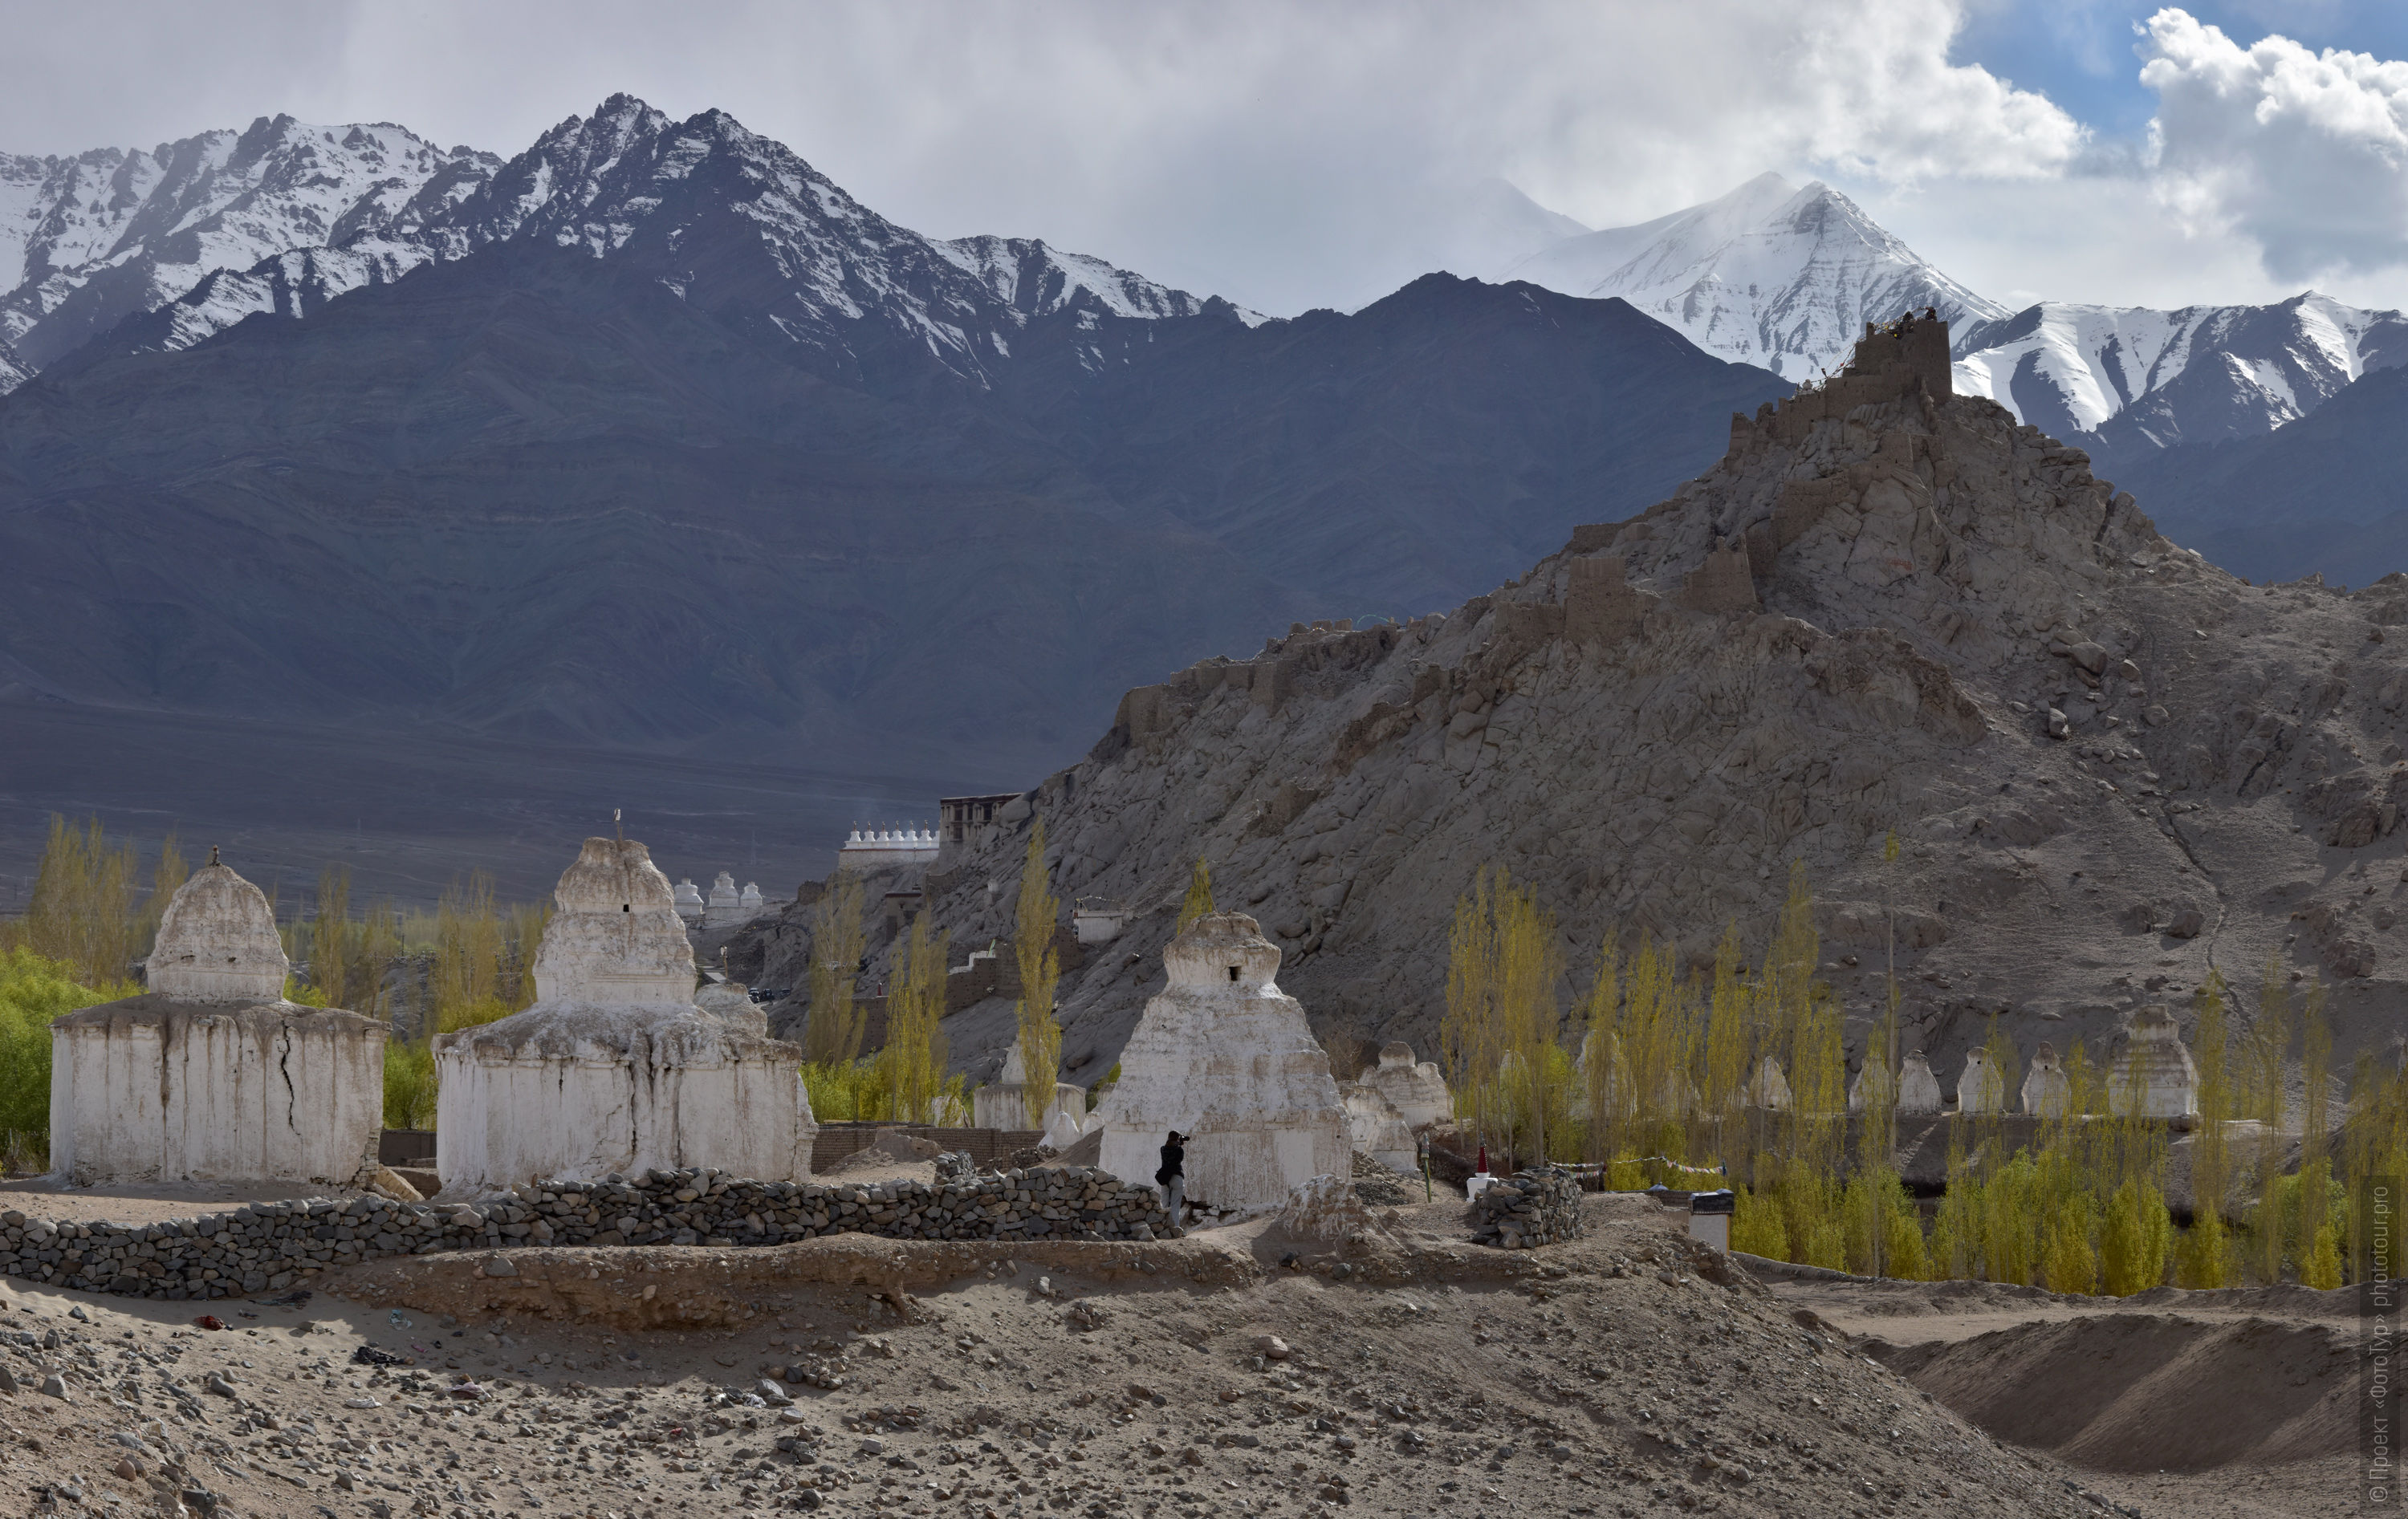 The monastery of Shay Gonpa. Tour for artists in Tibet: Watercolor-1: Watercolor painting in Ladakh with Pavel Pugachev, 04.08. - 13.08. 2019.